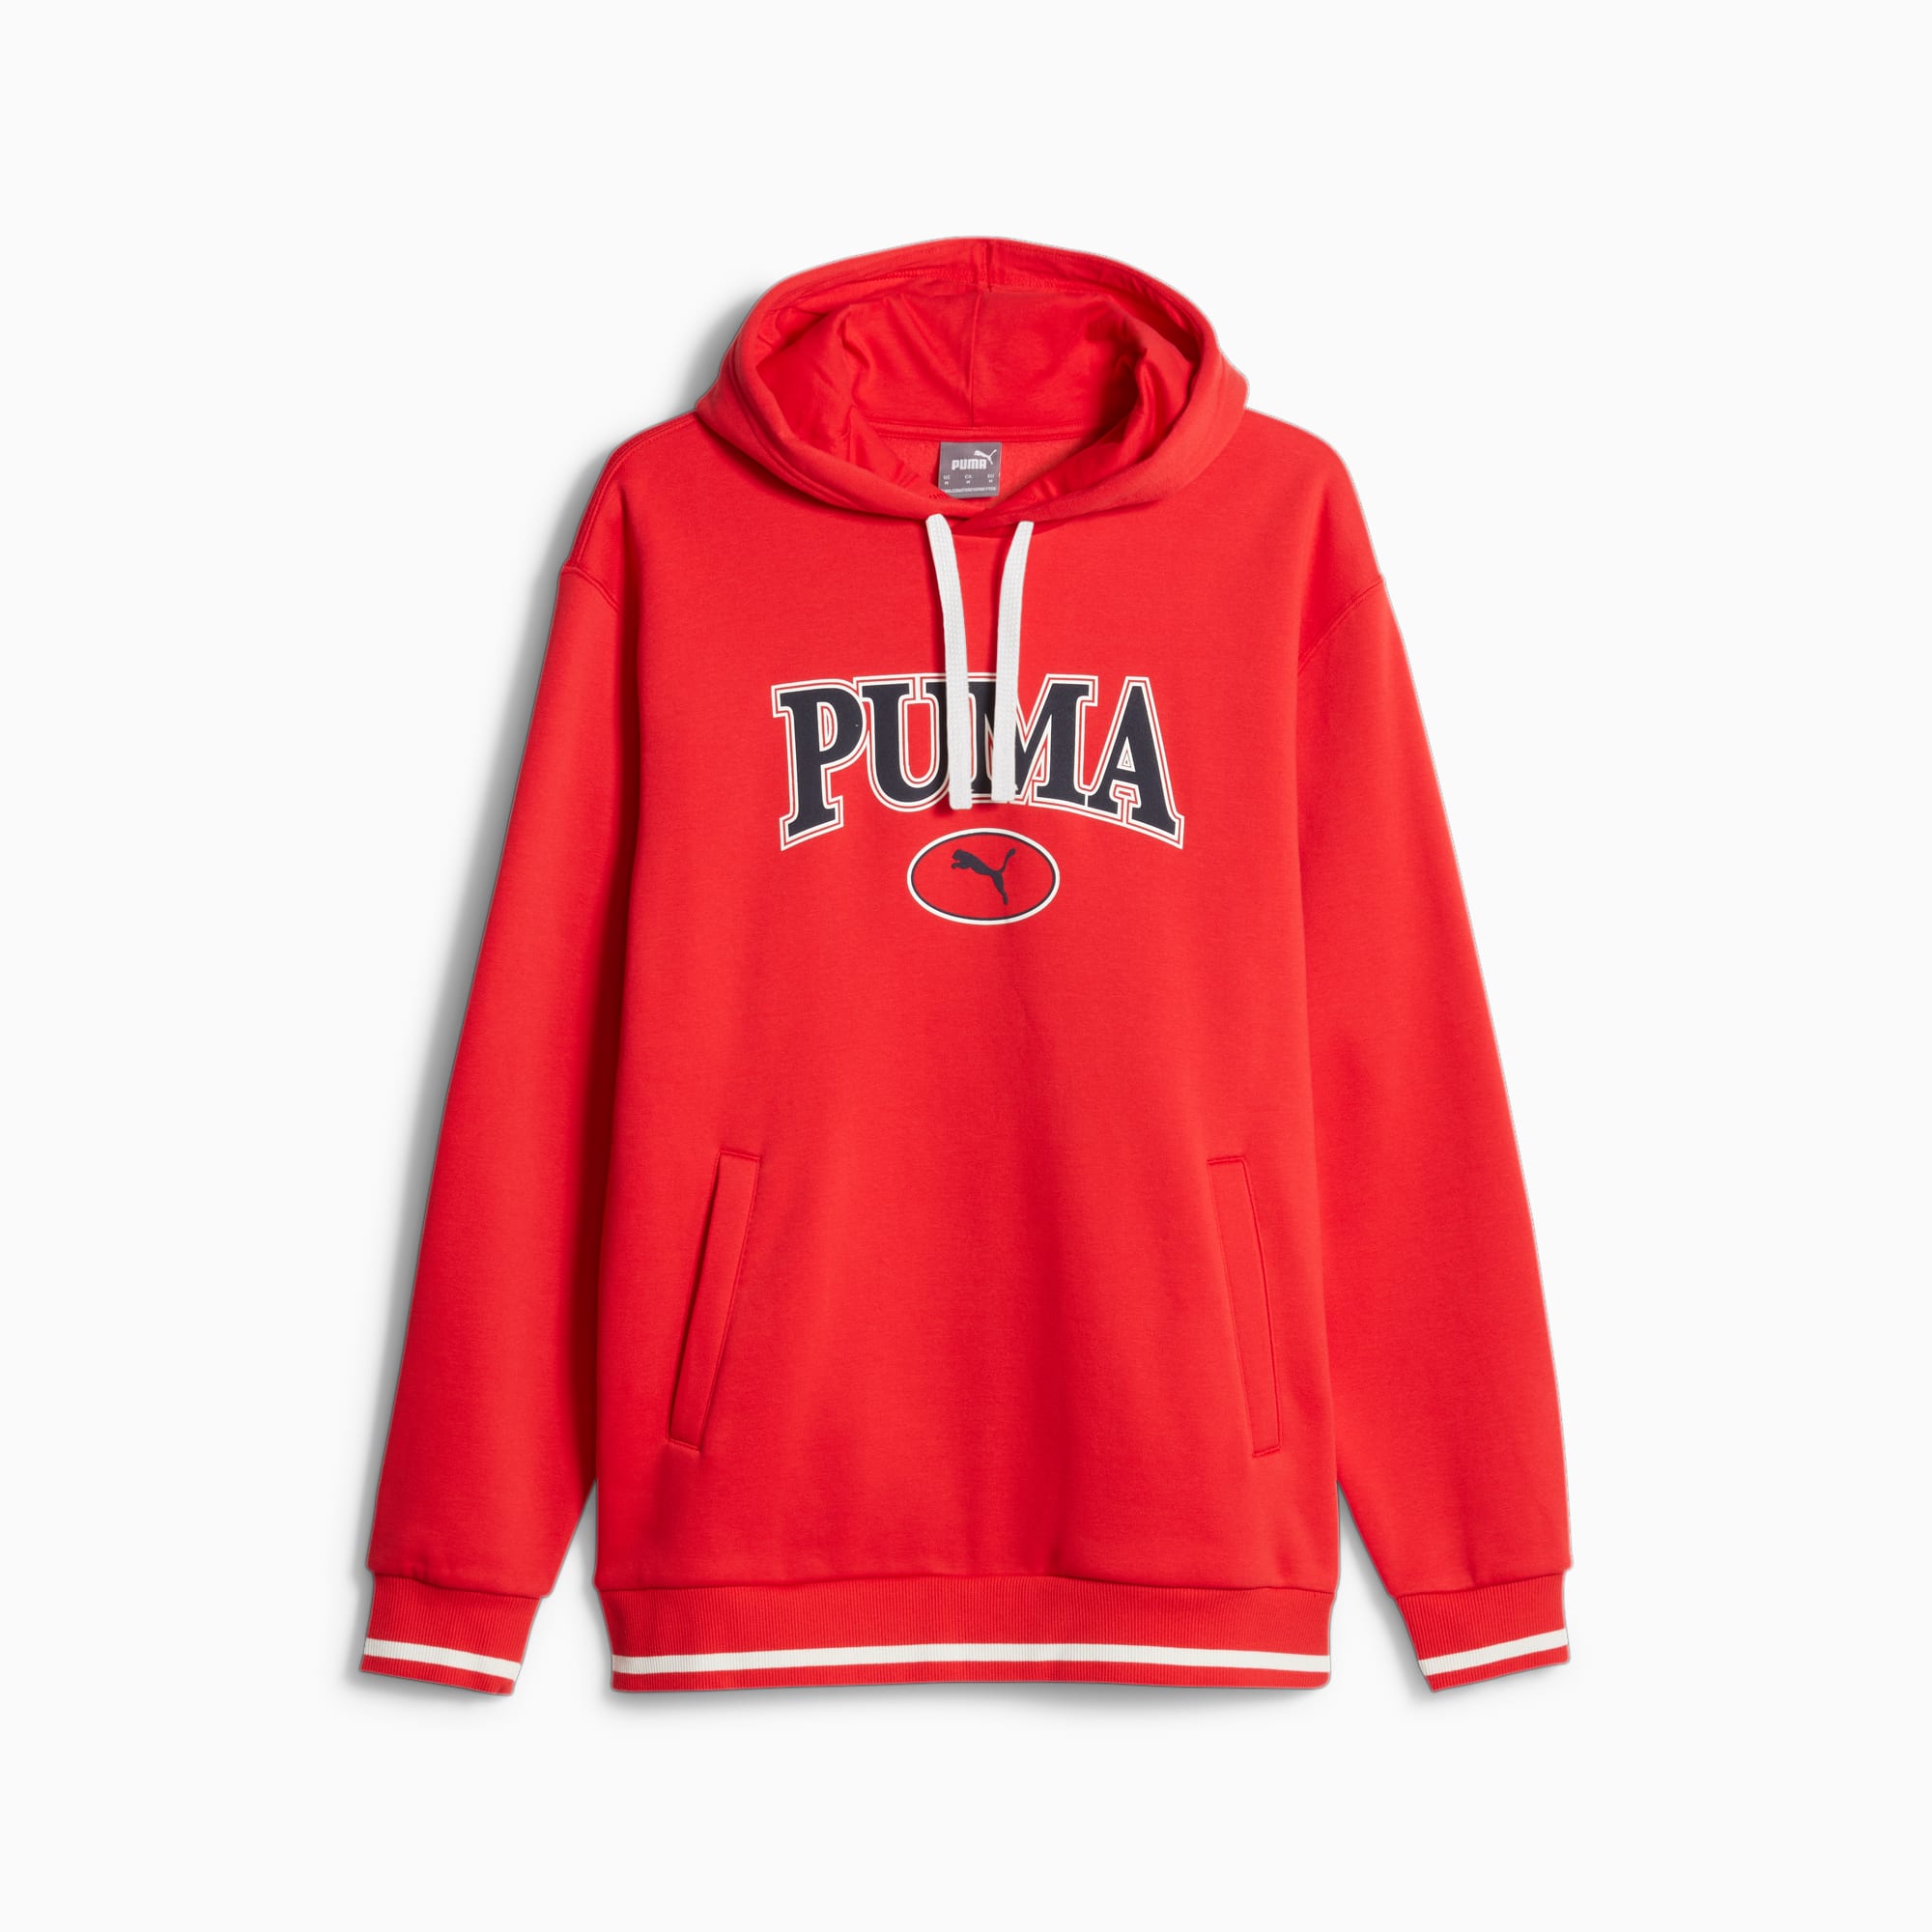 PUMA Squad Men's Hoodie, For All Time Red, Size XS, Clothing